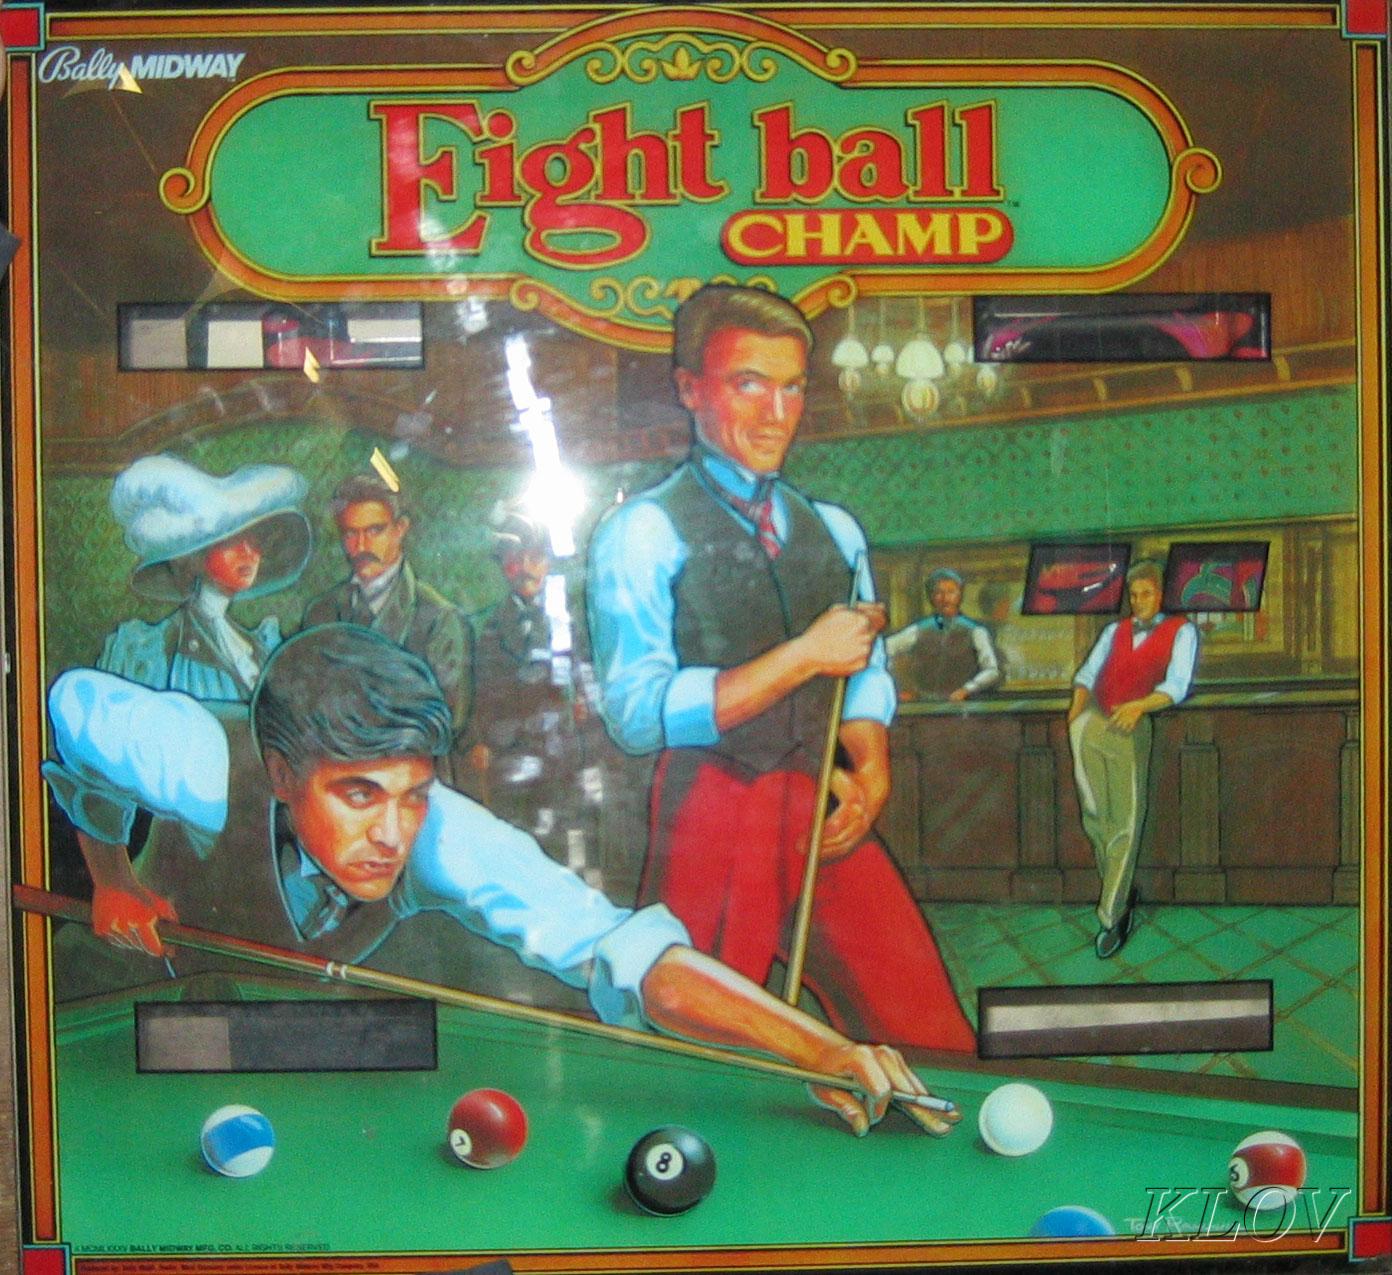 1985 Bally//Midway Eight Ball Champ Tune-up Kit